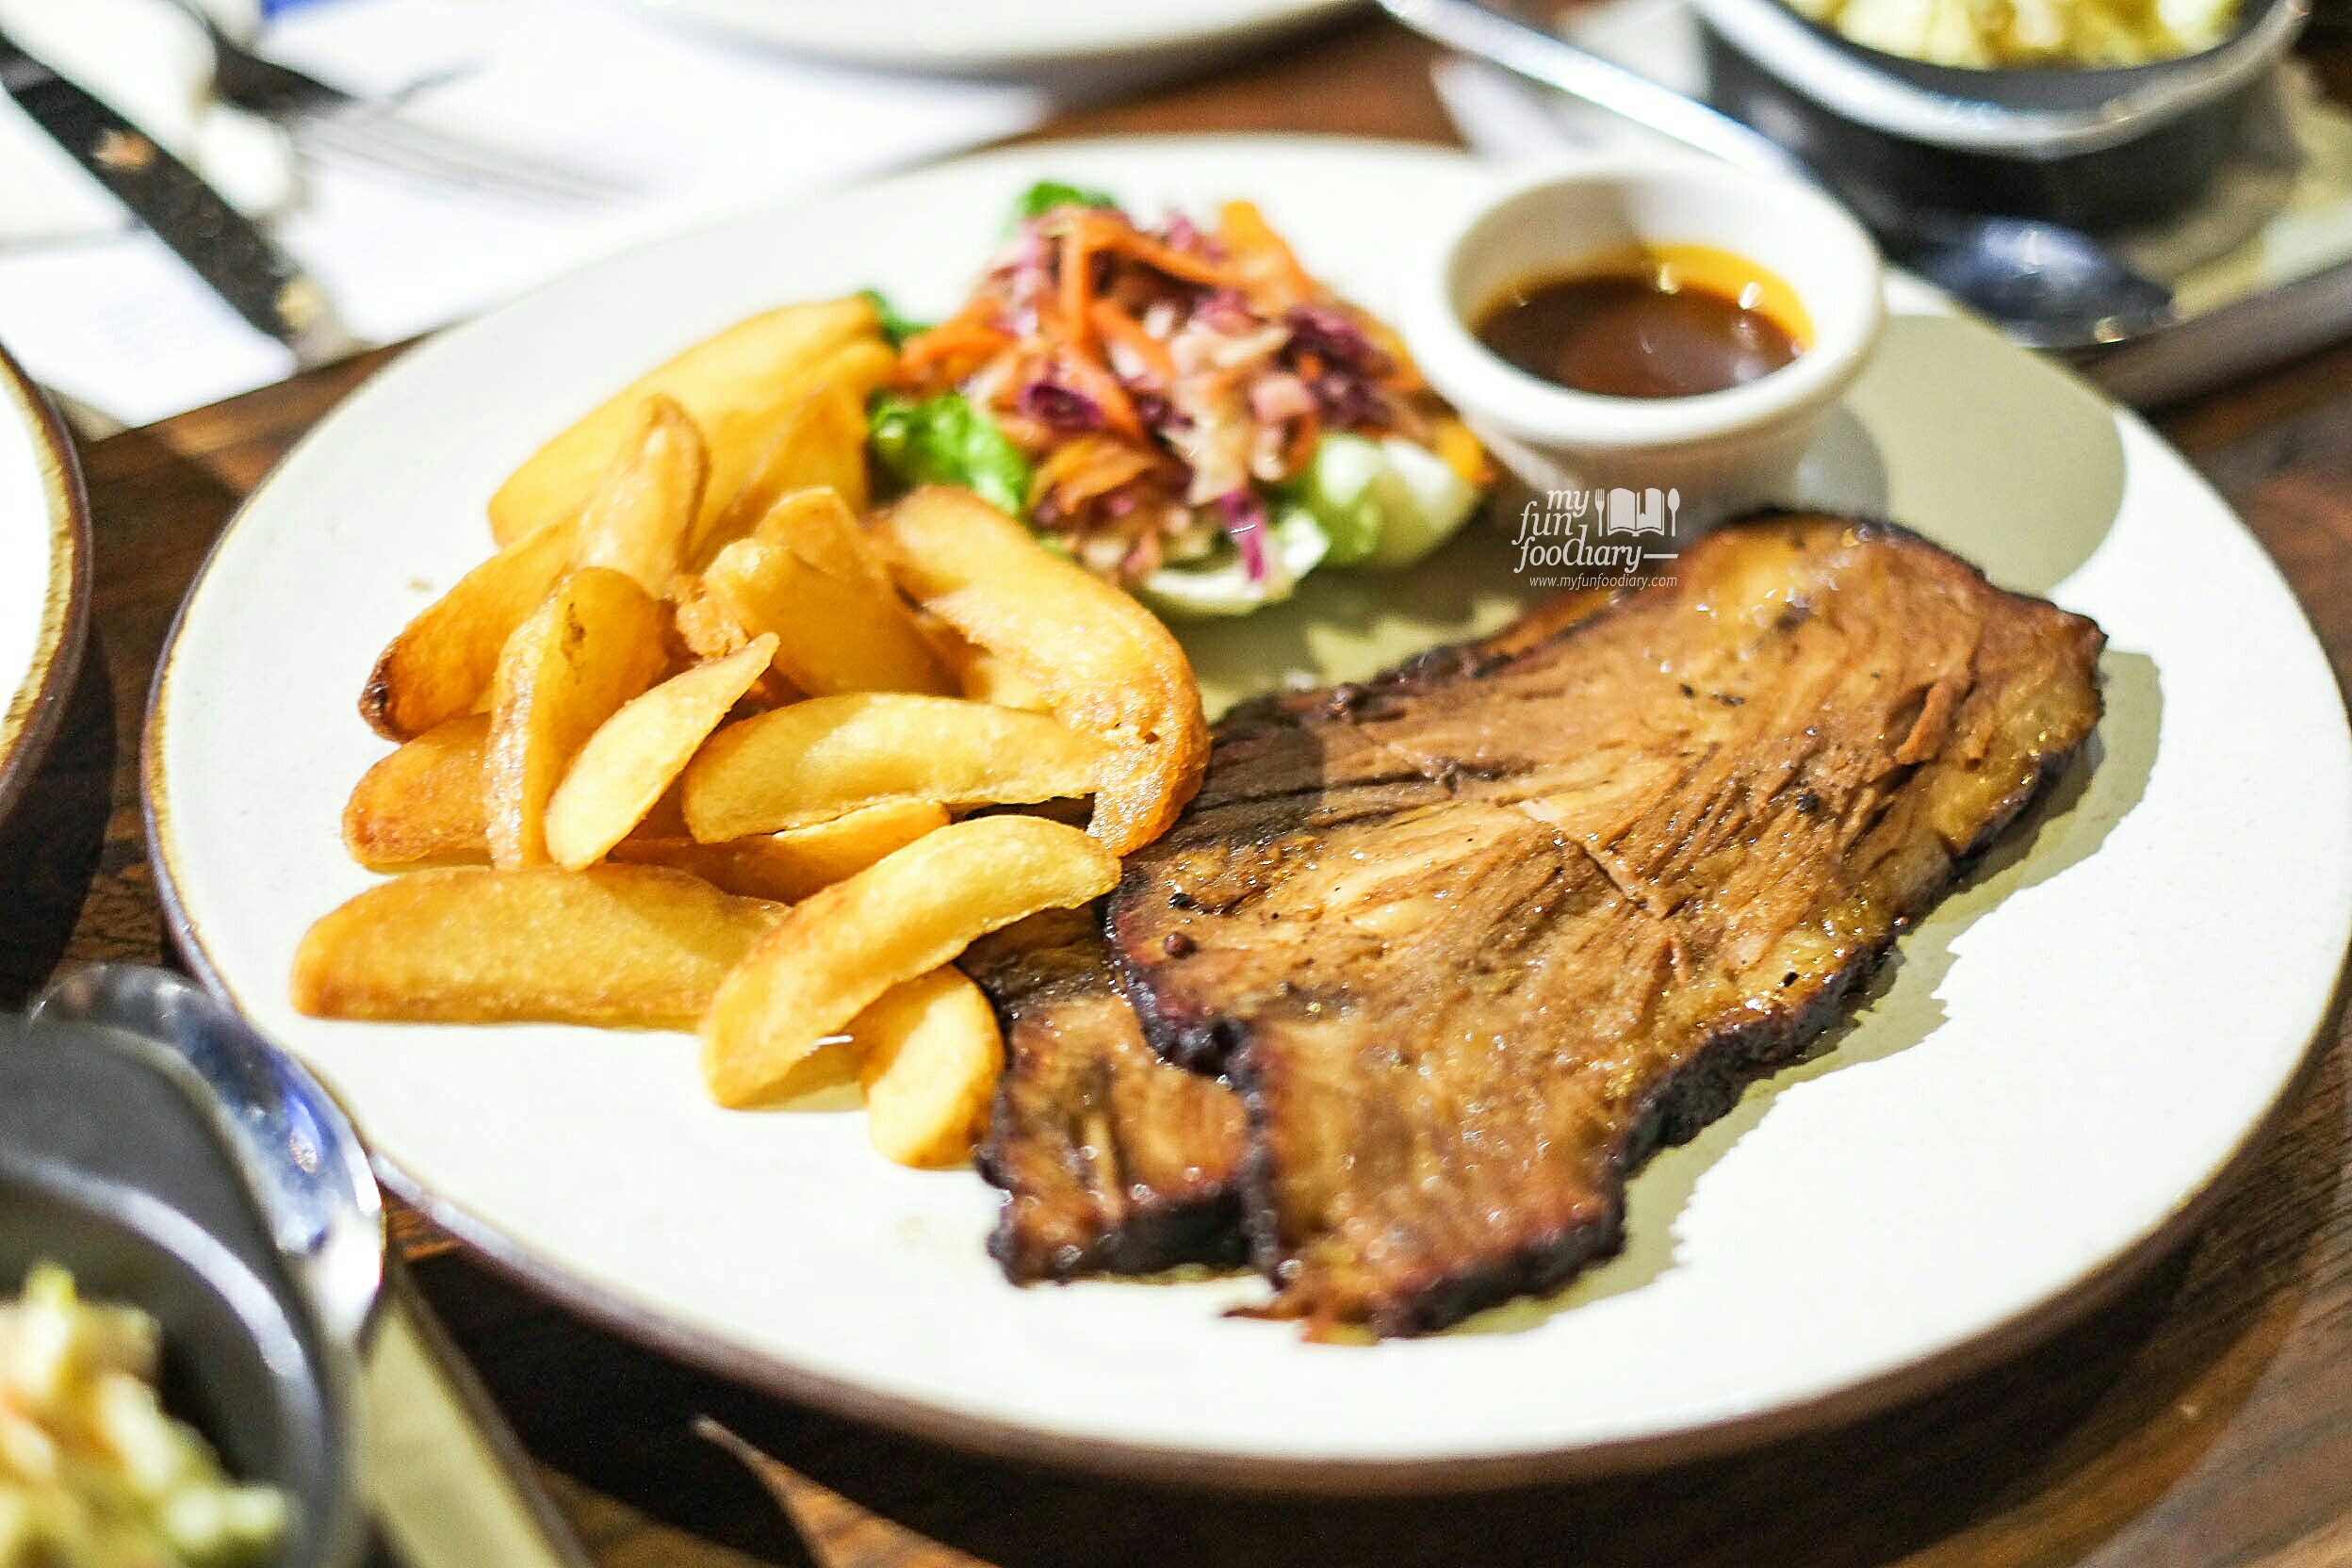 Beef Brisket at Potato Head SCBD Pacific Place by Myfunfoodiary